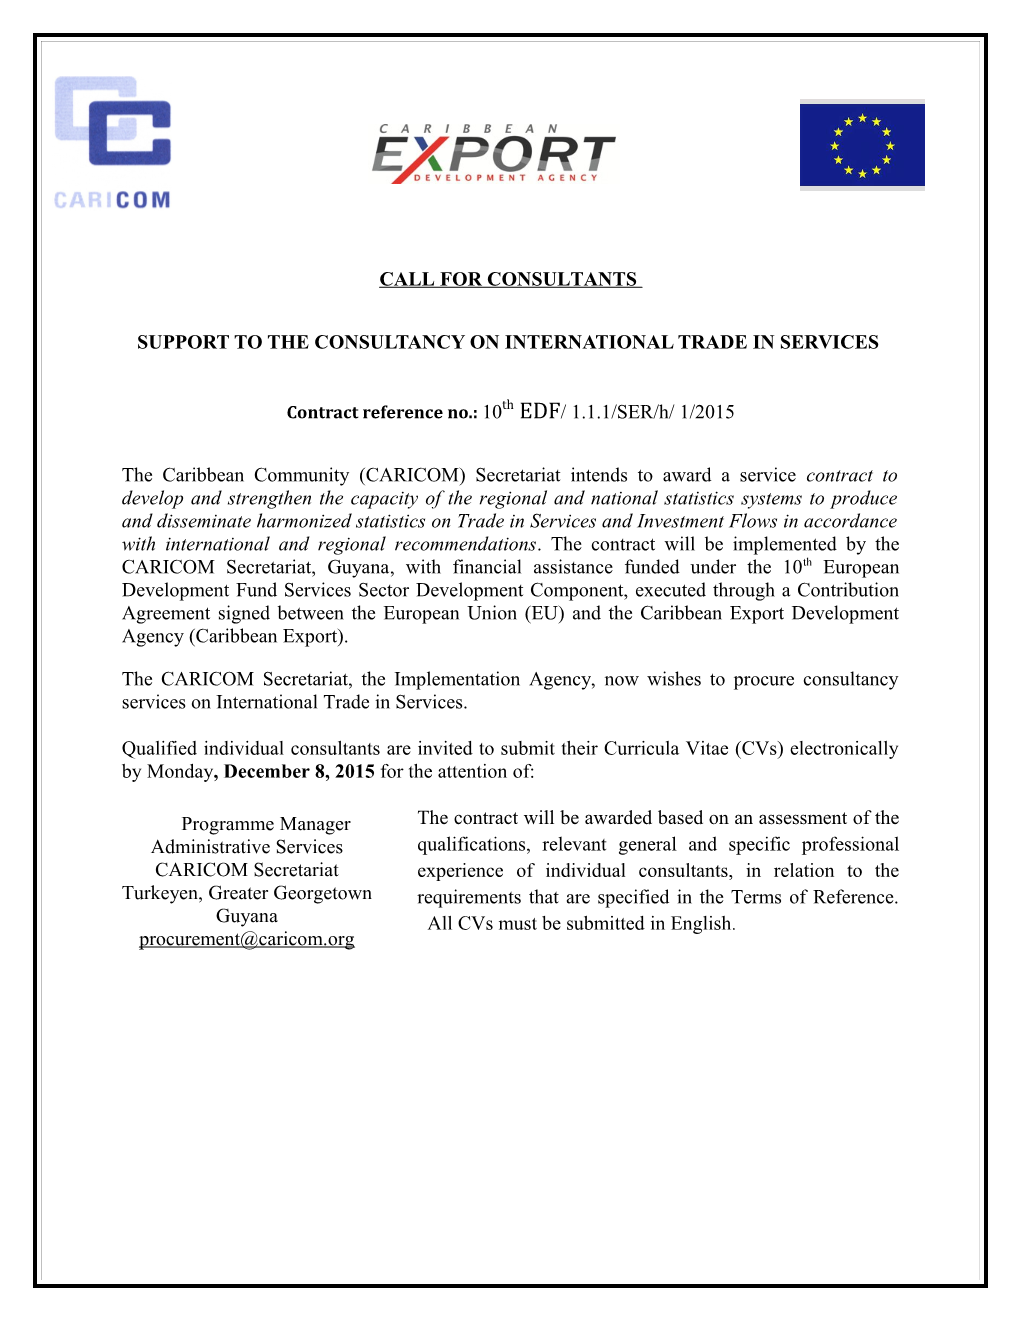 Support to the Consultancy on International Trade in Services